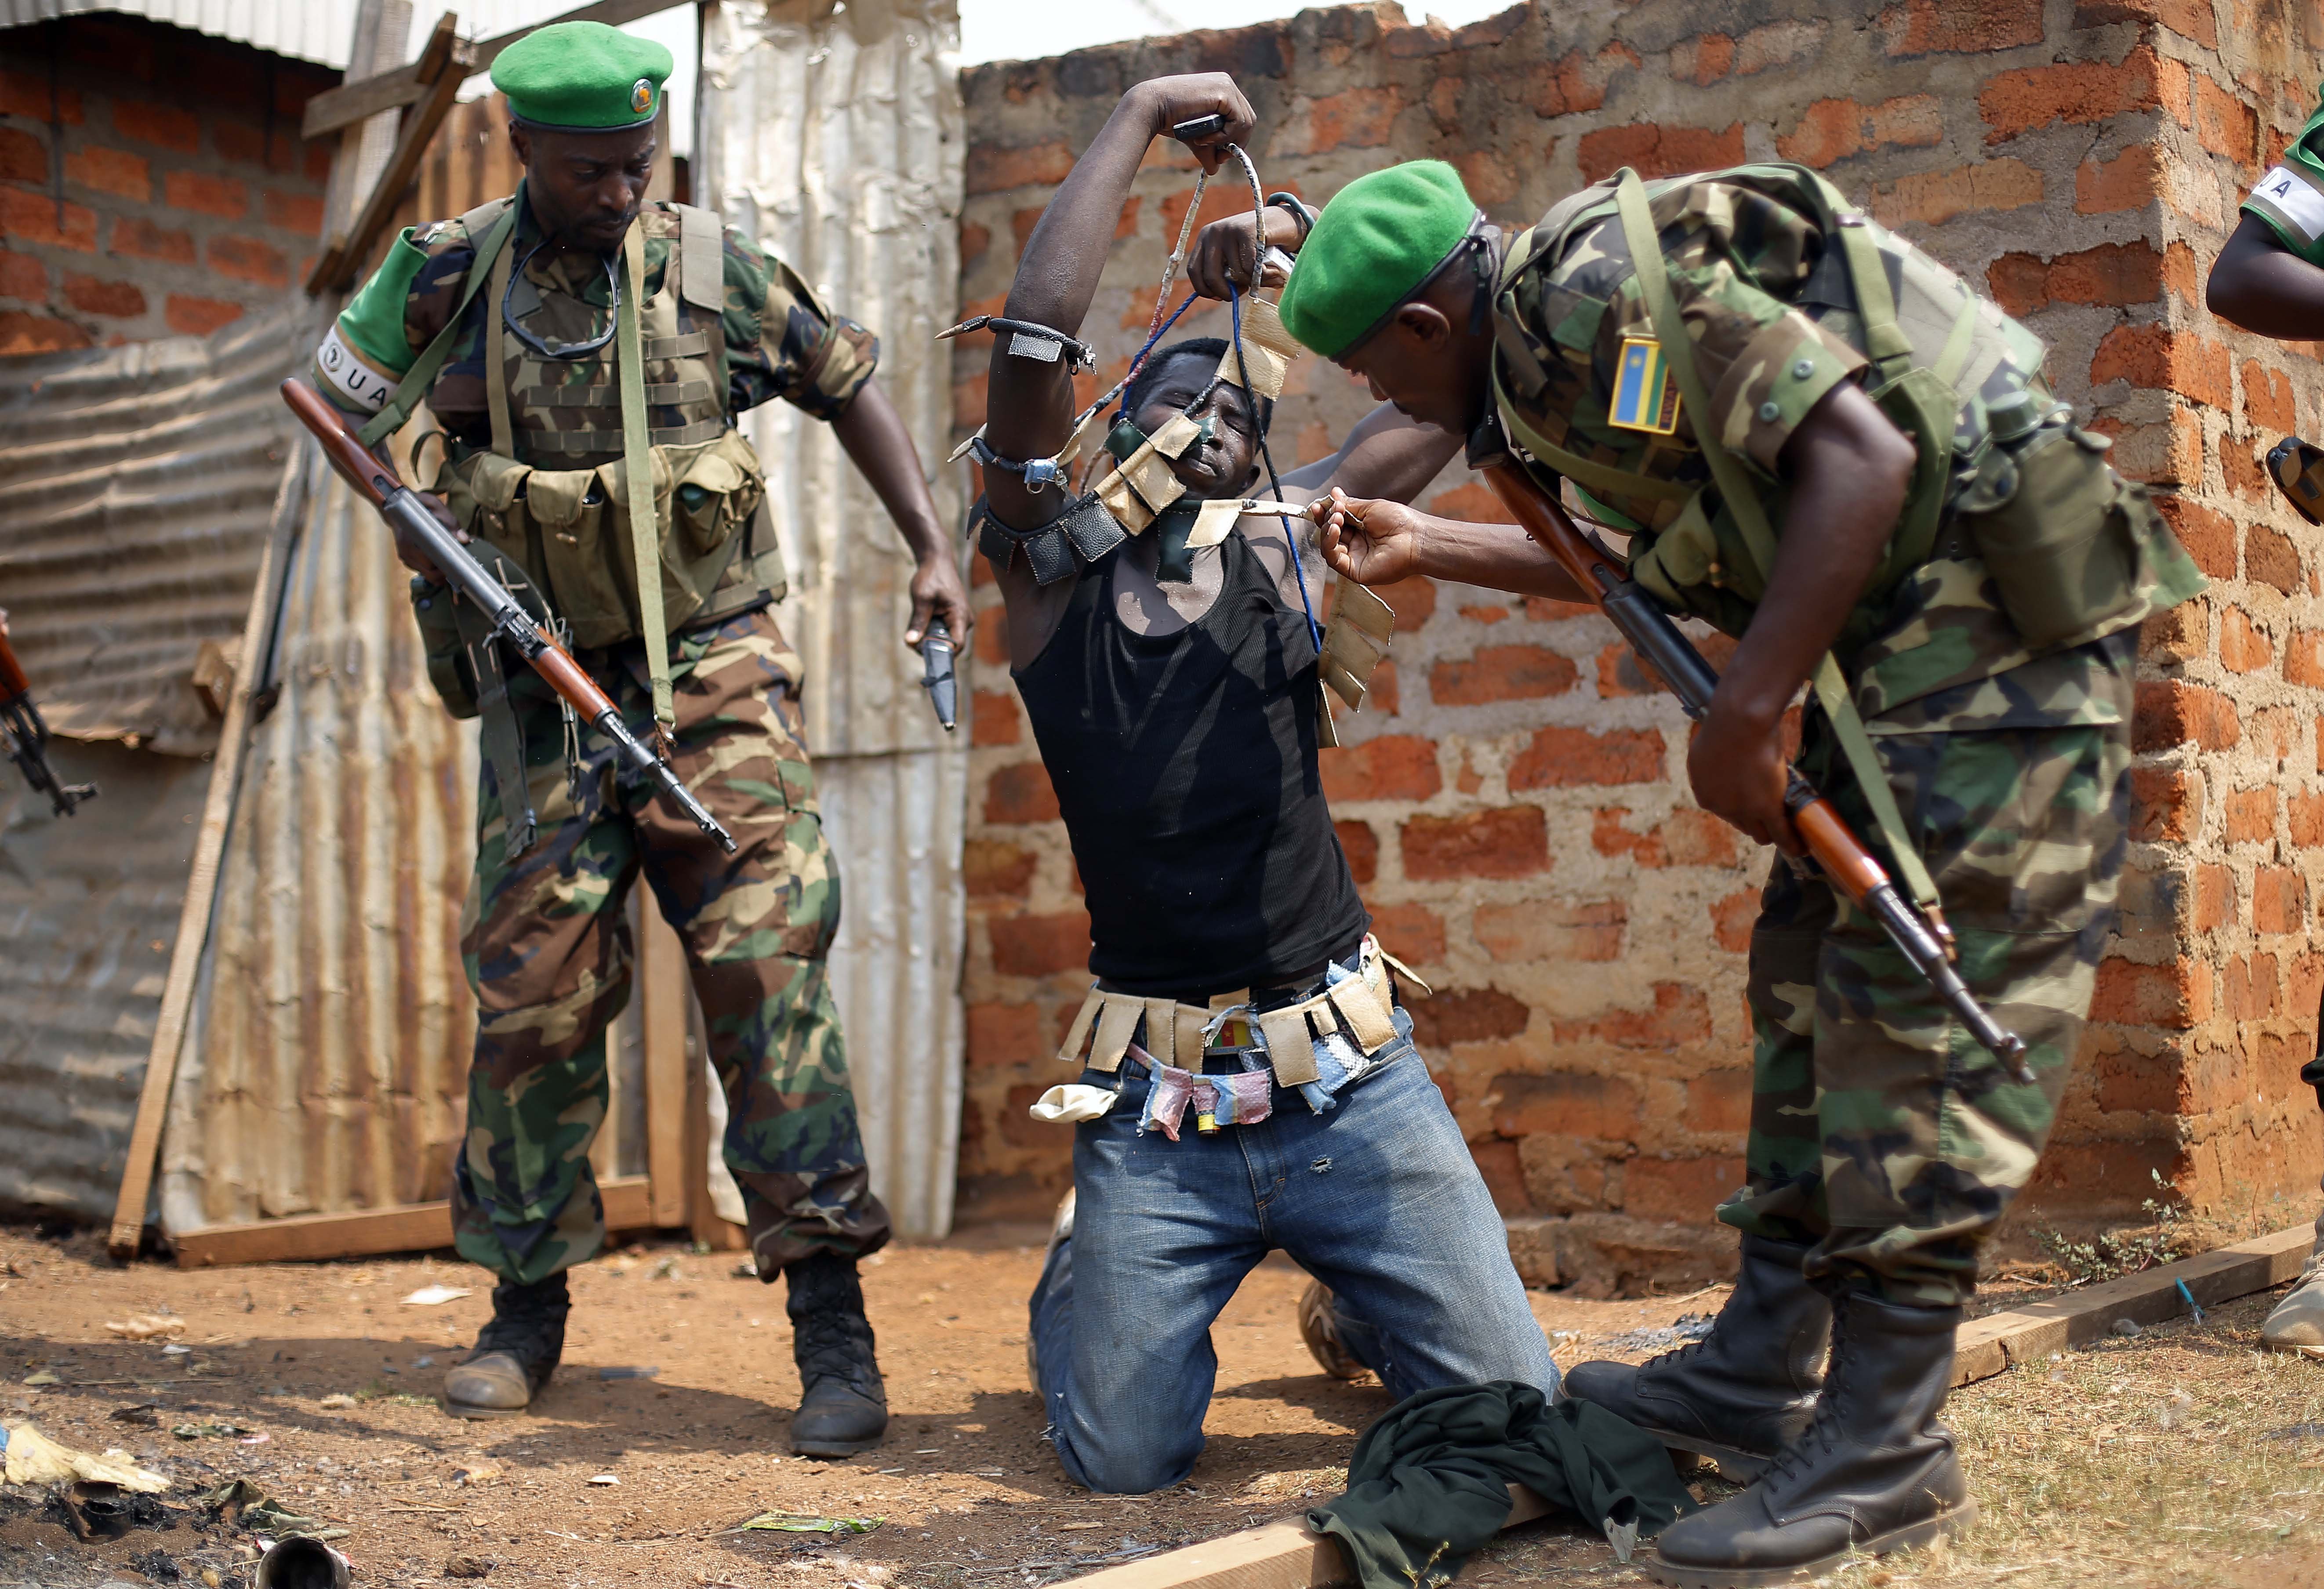 Rwandan African Union peacekeepers remove the lucky charms from a suspected Anti-Balaka Christian man who was found with a rifle and a grenade following looting in the Muslim market of the PK13 district of Bangui, Central African Republic, Jan. 22, 2014.